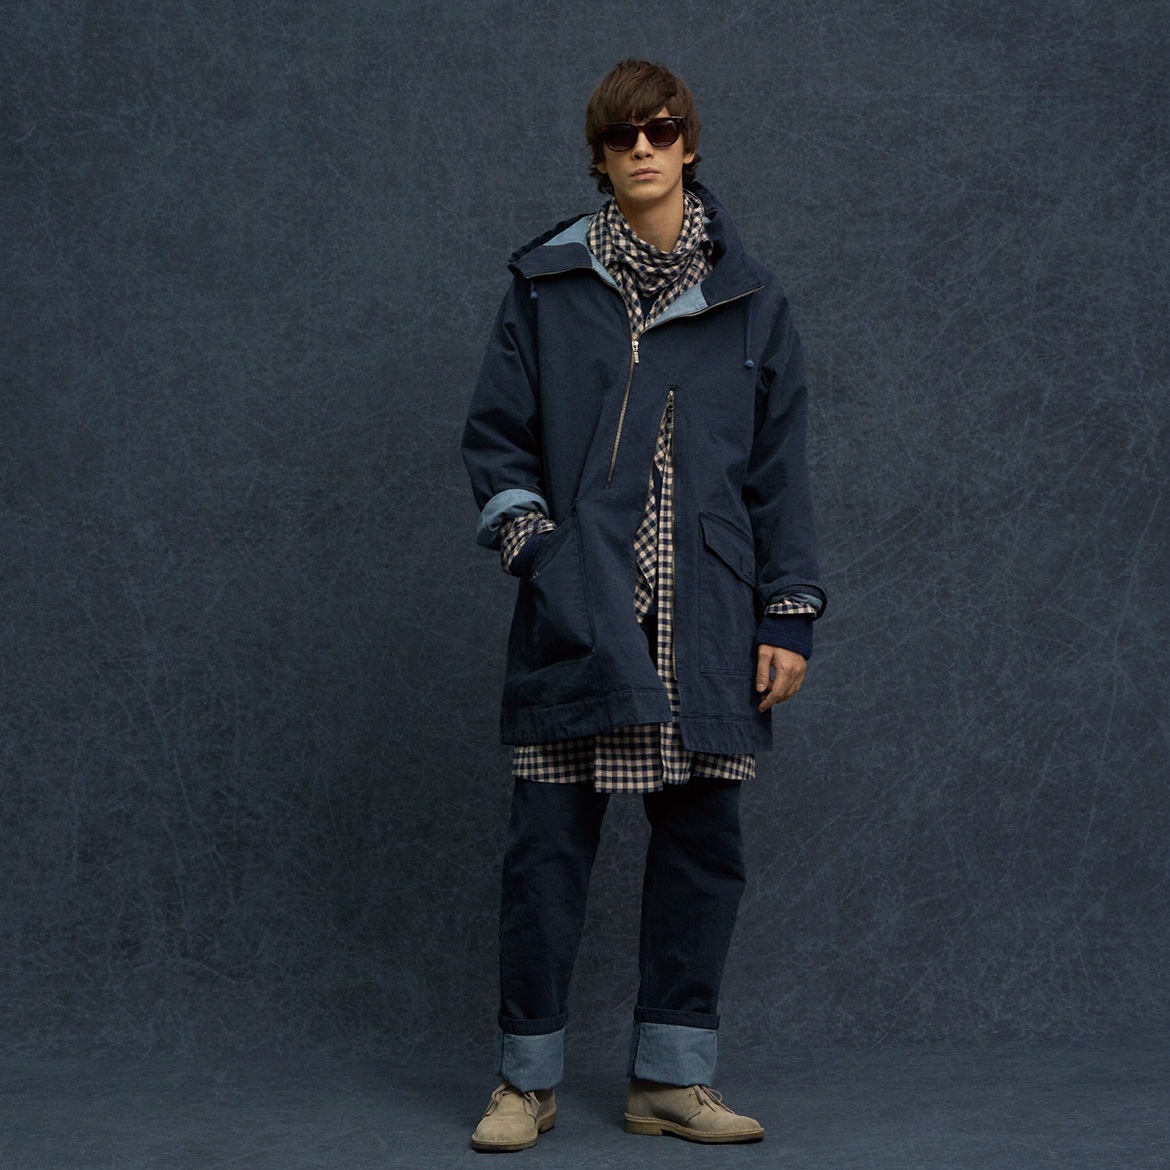 HAVEN Mixes Summer Staples from Japanese Brands WTAPS and 